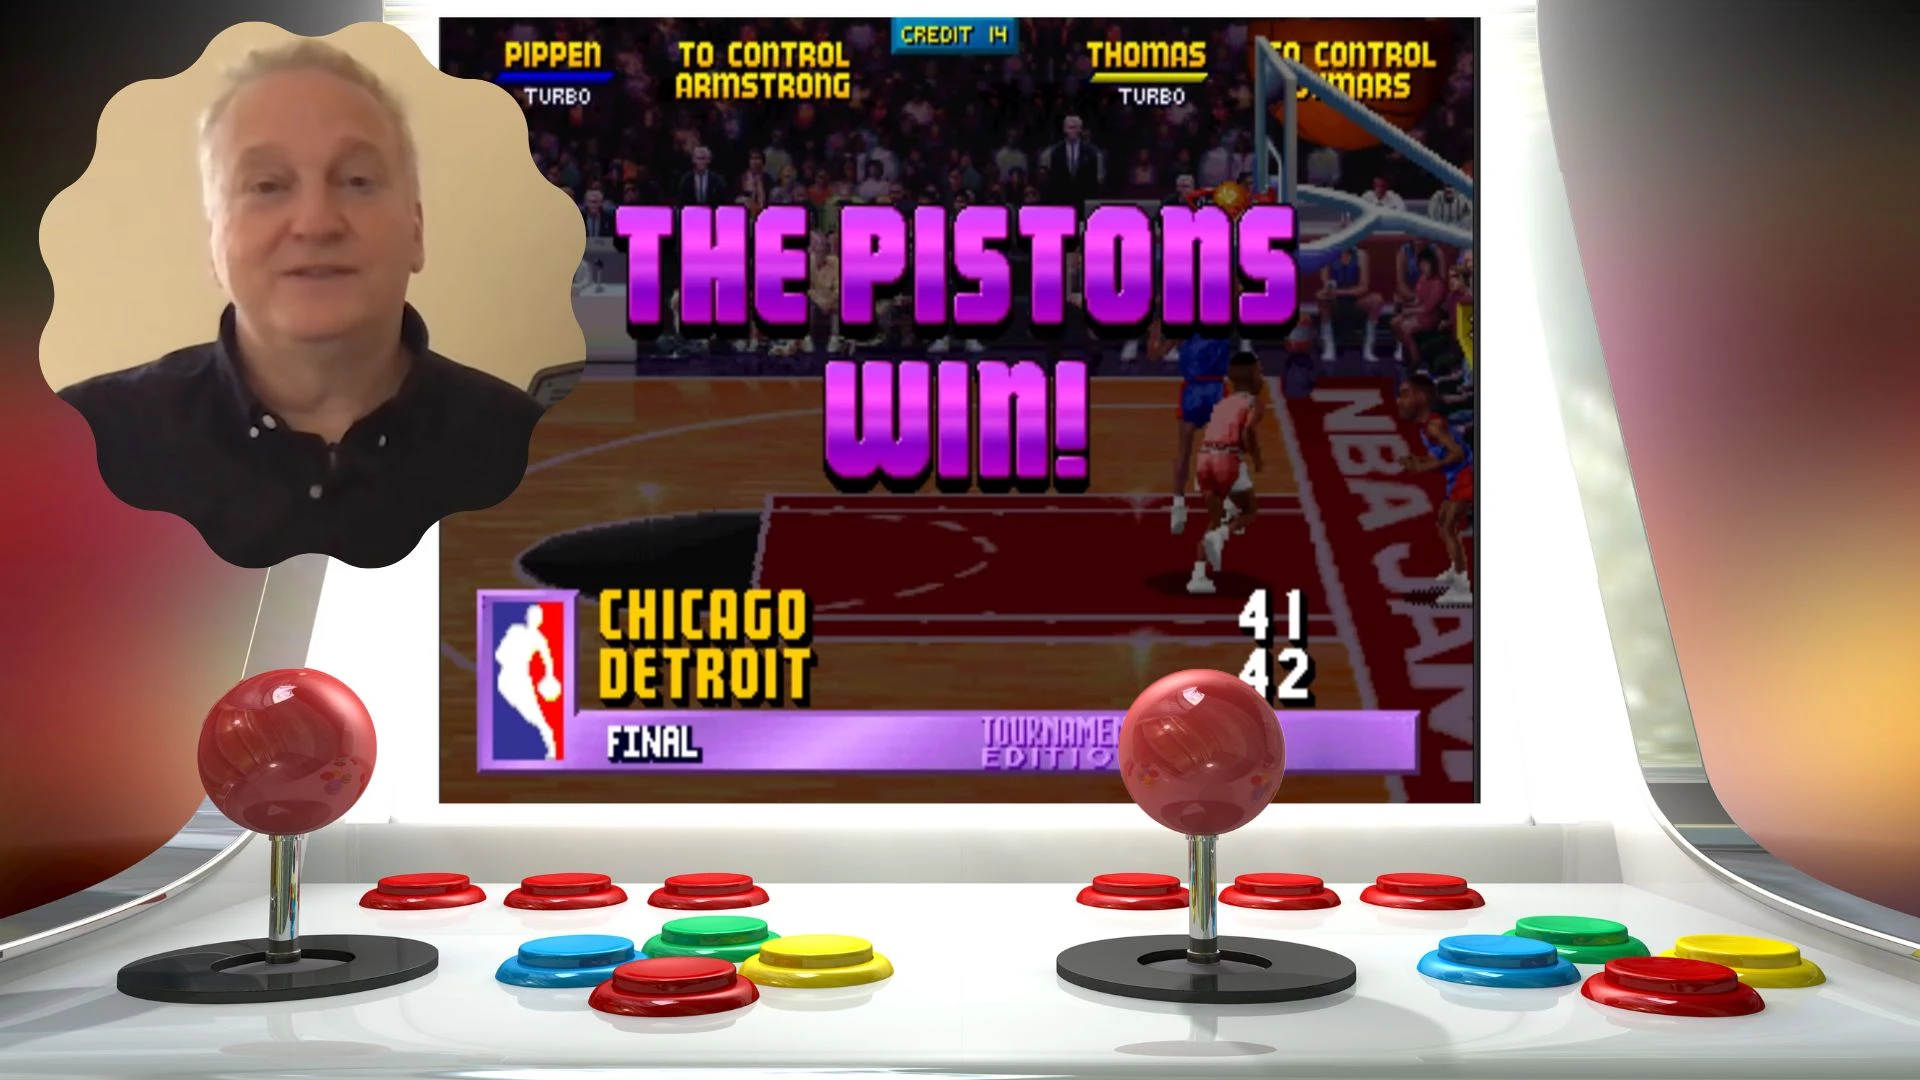 NBA Jam creator admits the game was rigged against the Chicago Bulls